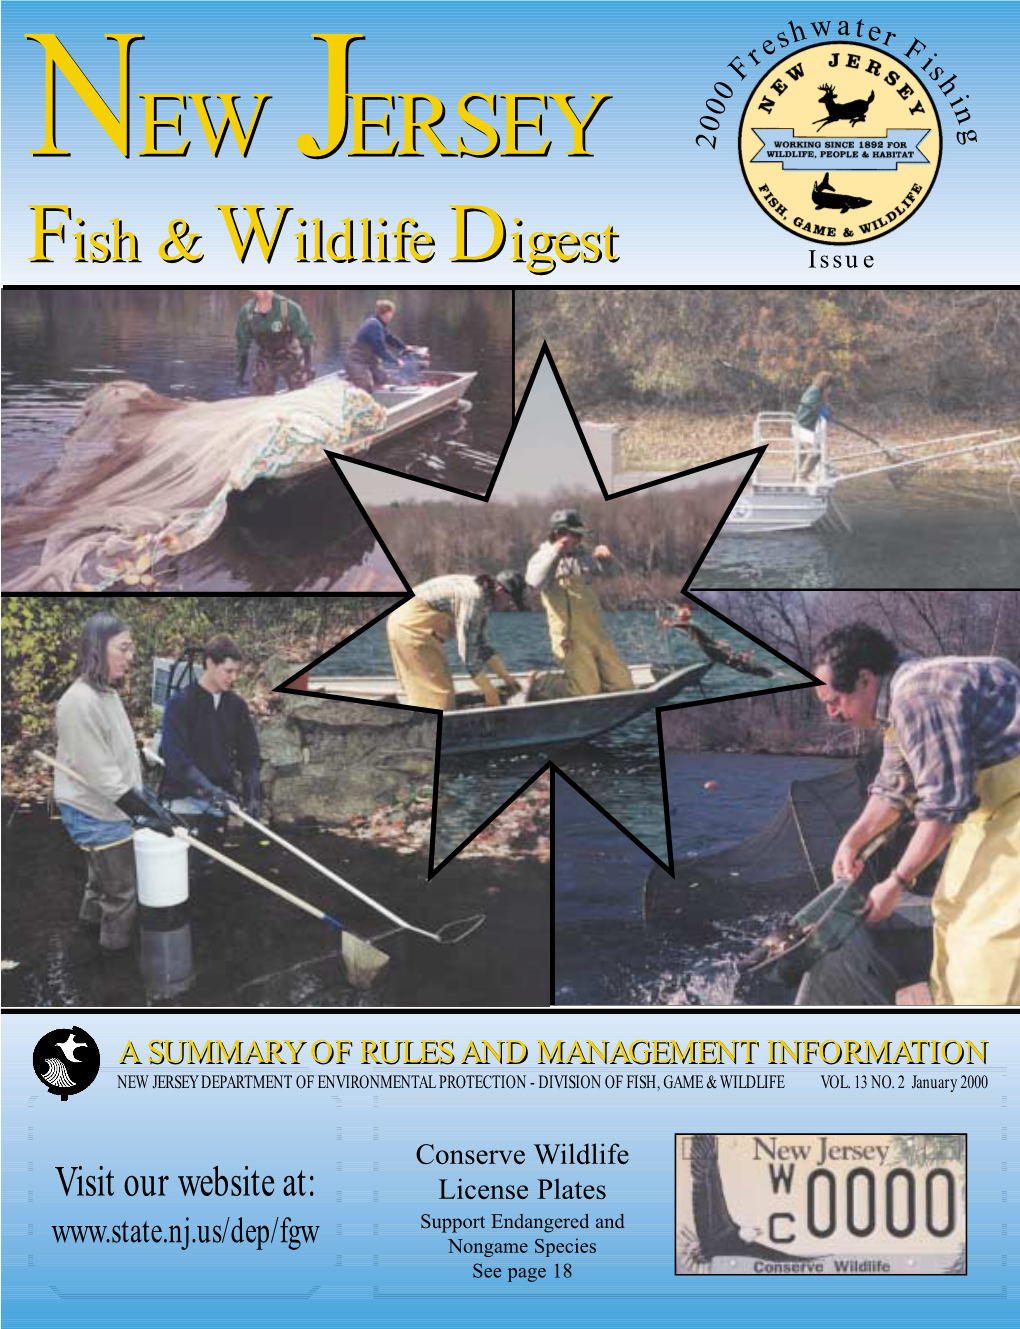 TROUT FISHING REGULATIONS Trout Season and Daily Creel Limit the Trout Season for 2000 Begins at 12:01 A.M., January 1, and Extends to Midnight, March 19, 2000